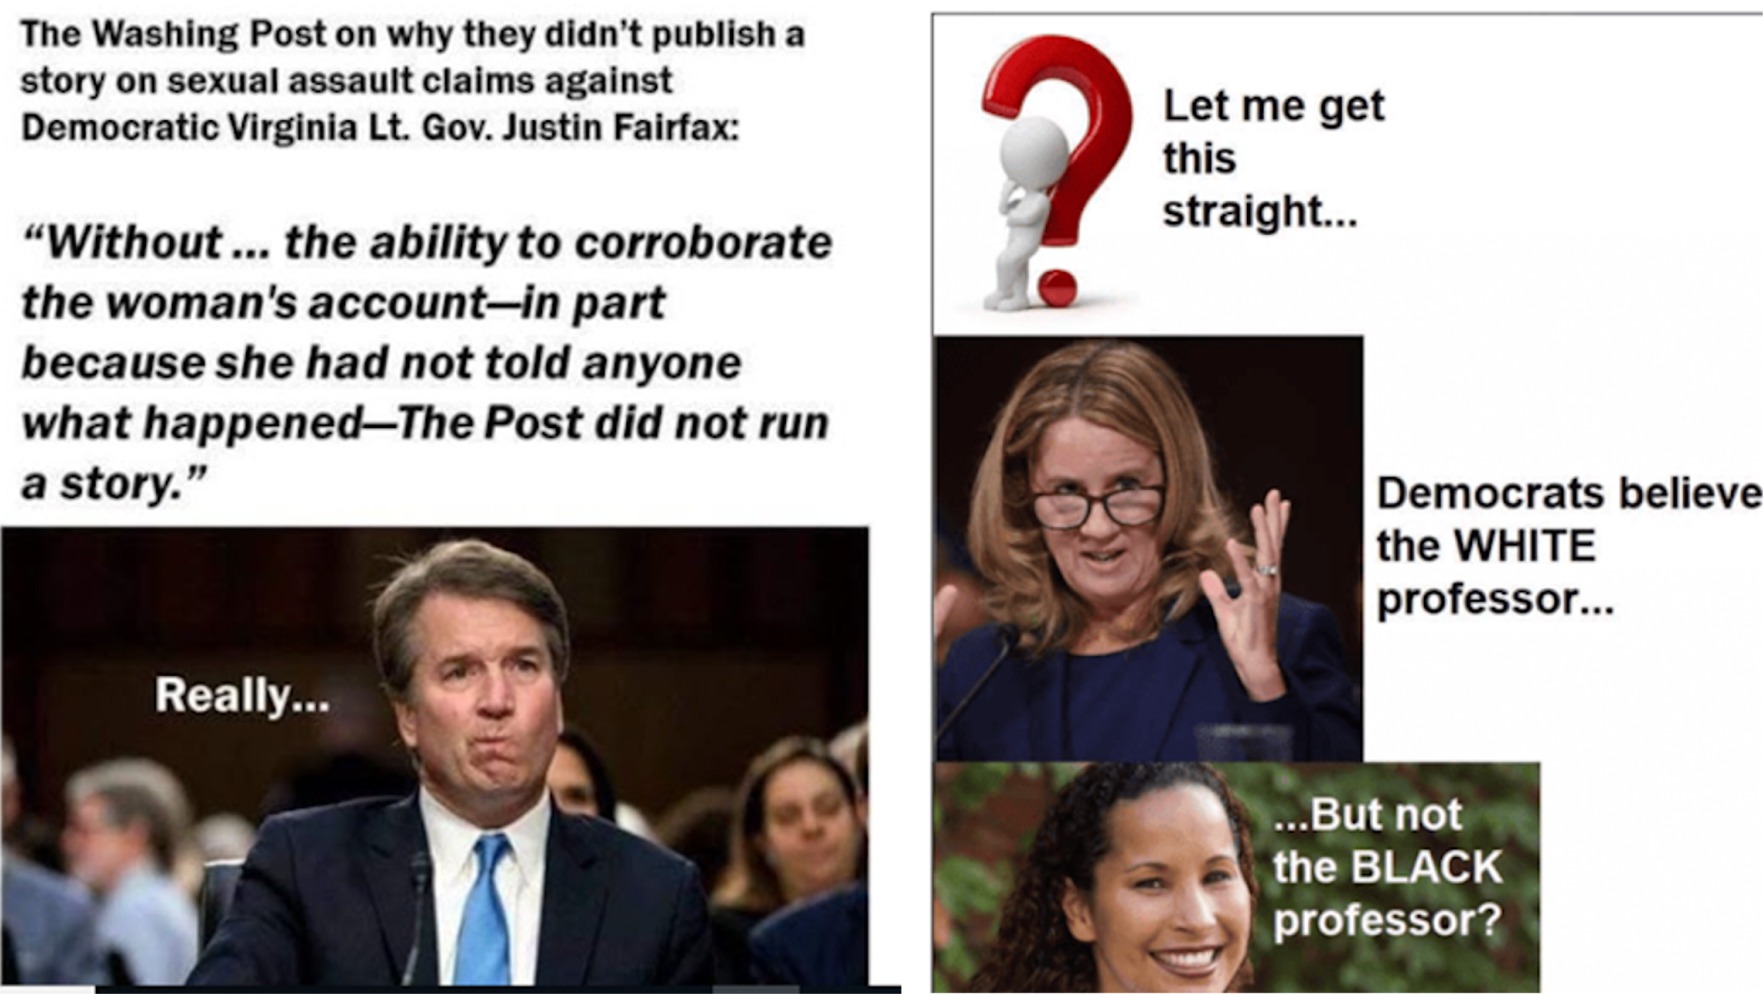 memes - thinking person - The Washing Post on why they didn't publish a story on sexual assault claims against Democratic Virginia Lt. Gov. Justin Fairfax Let me get this straight... "Without ... the ability to corroborate the woman's accountin part becau